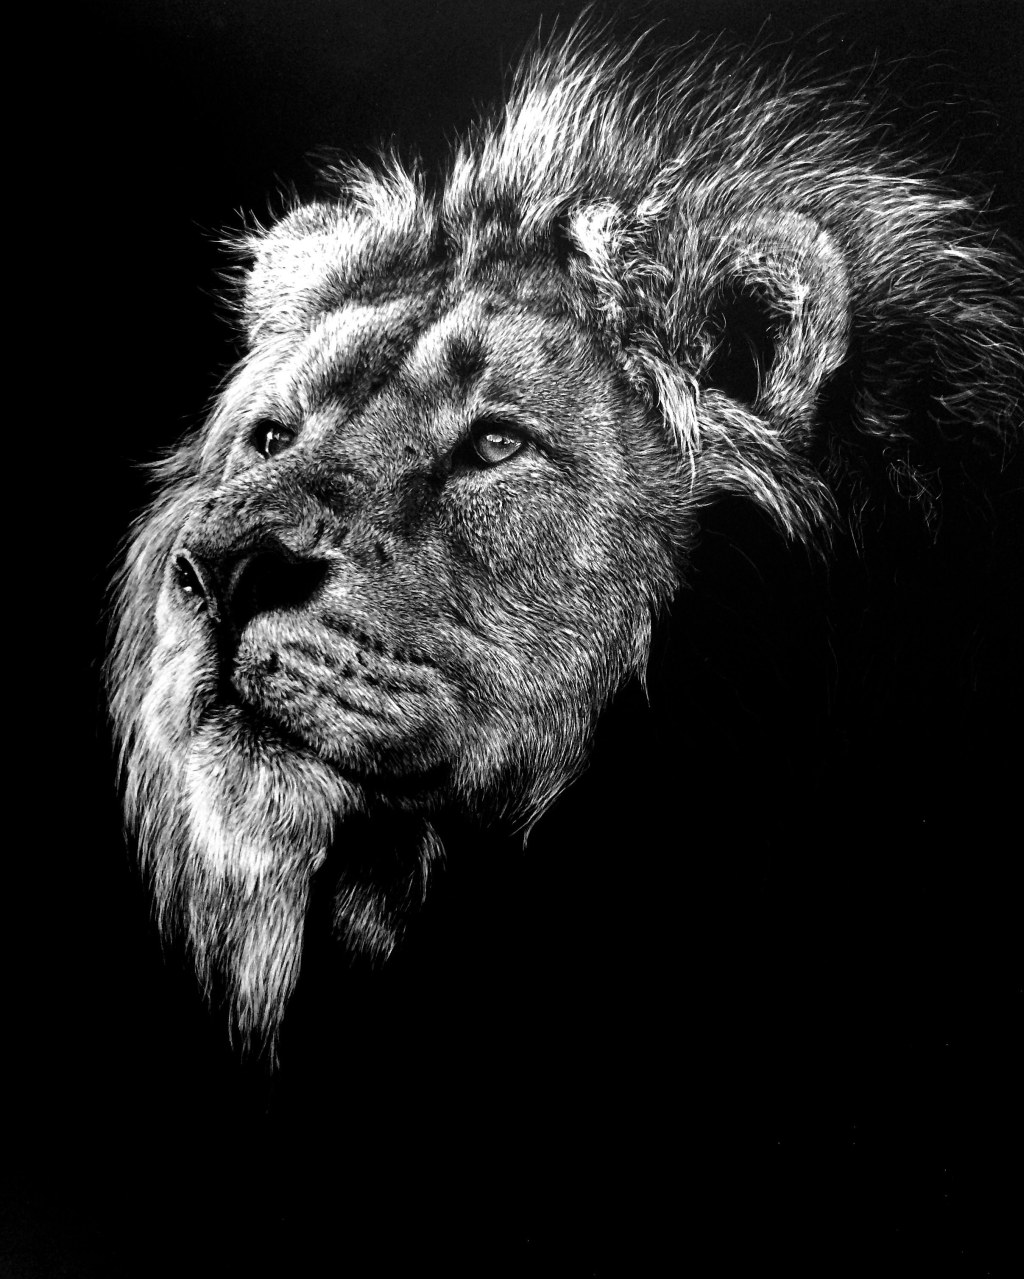 Picture of: Second update of #TheKing! #lion #scratchboard #artwork